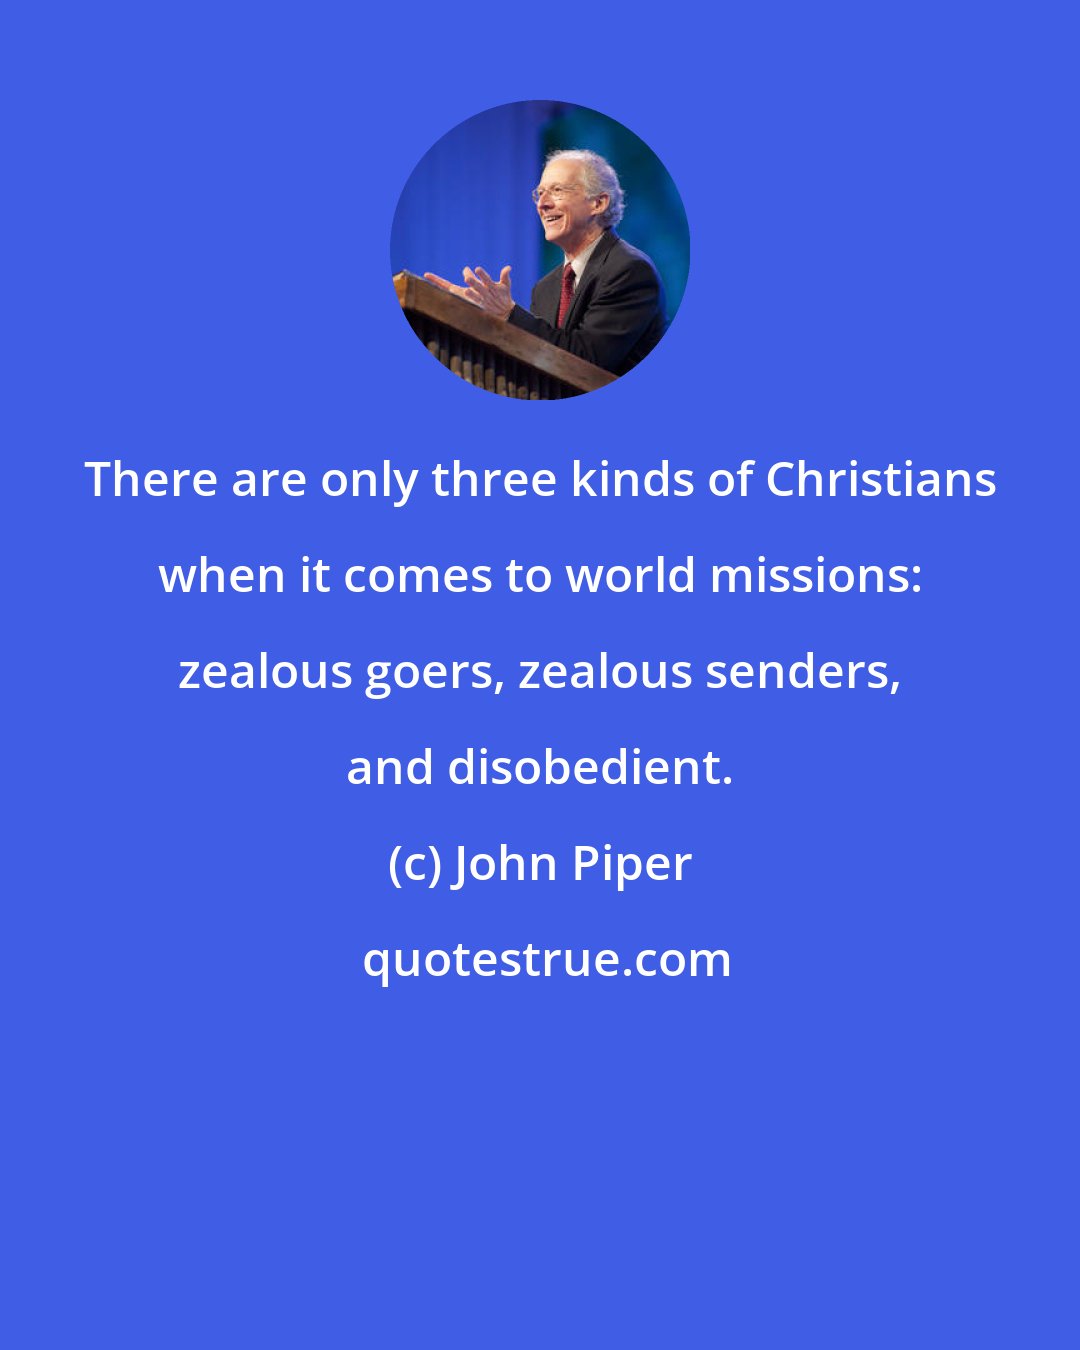 John Piper: There are only three kinds of Christians when it comes to world missions: zealous goers, zealous senders, and disobedient.